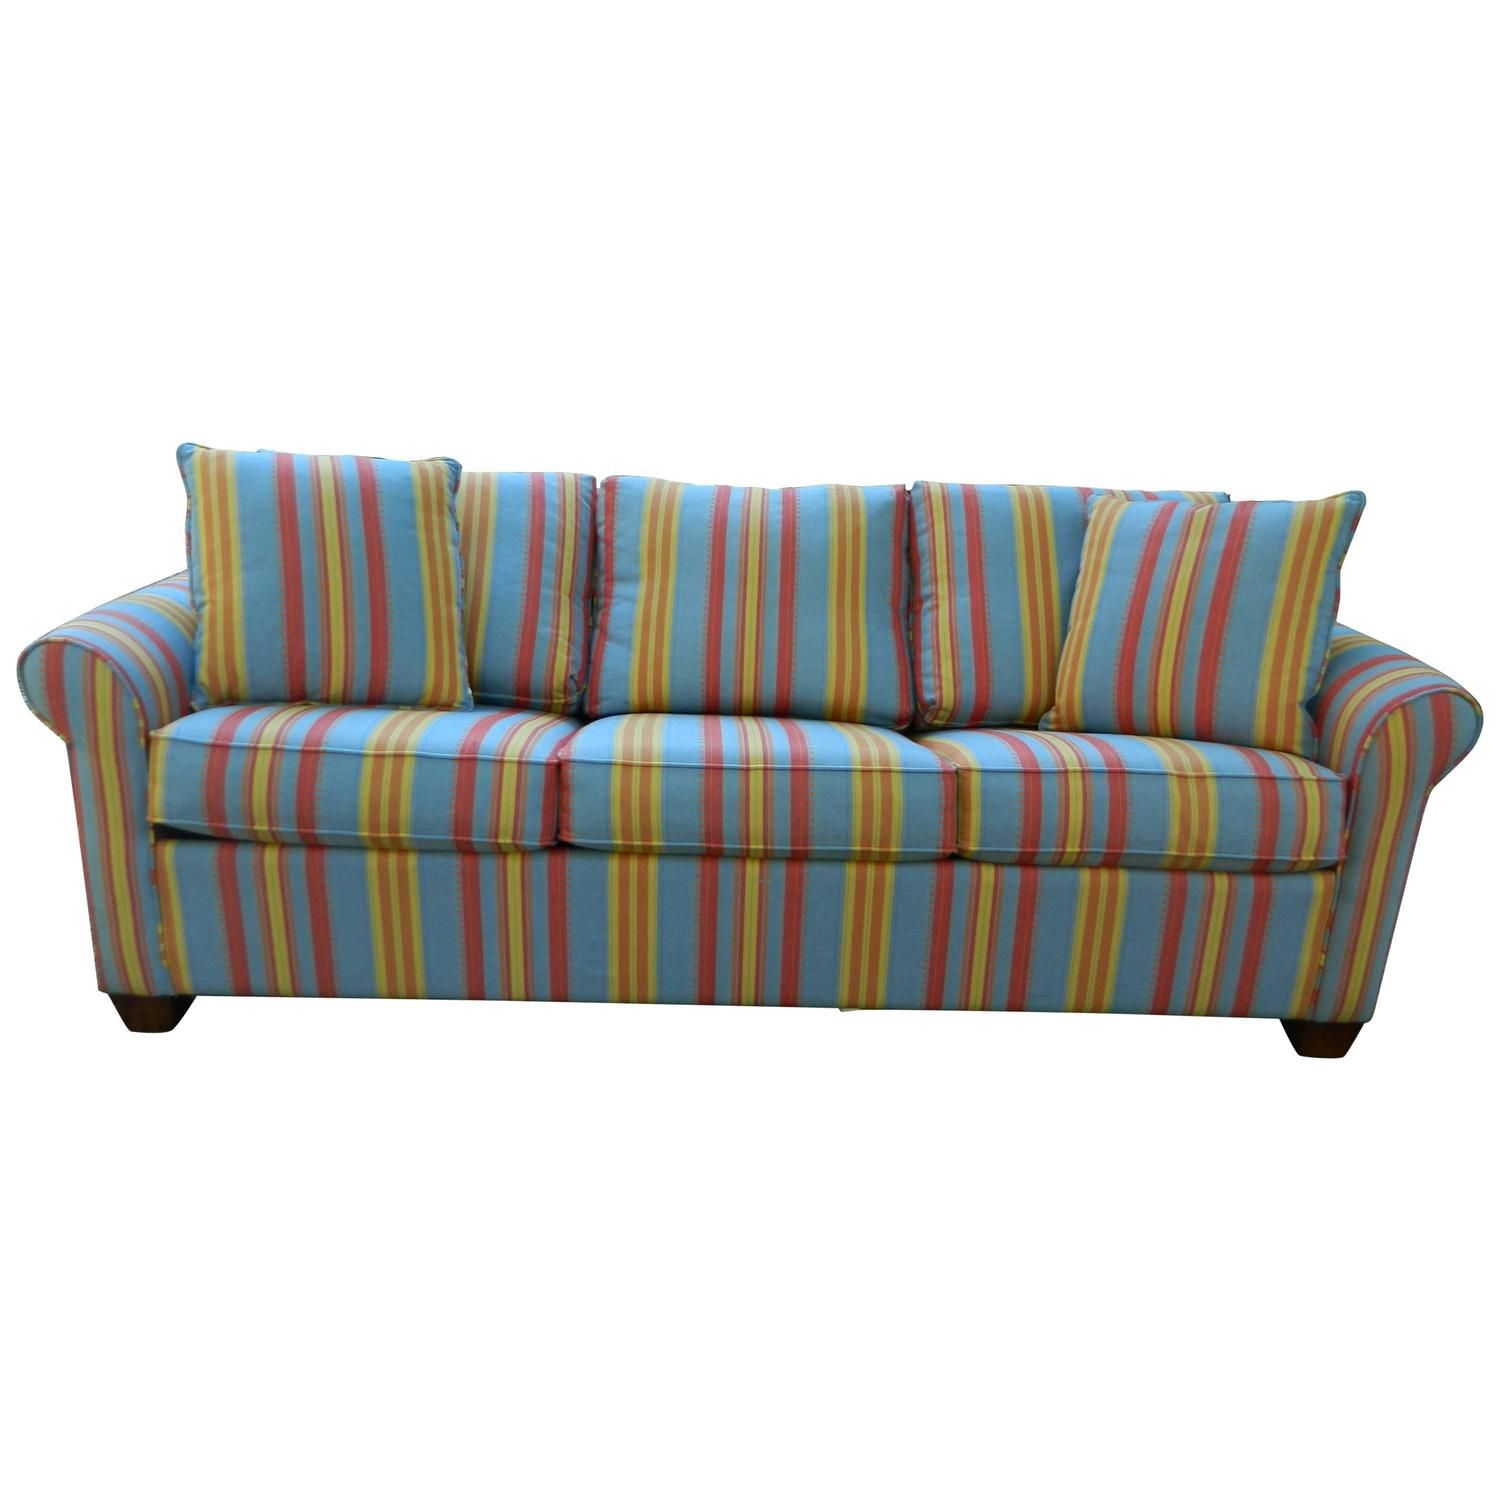 Multi Coloured Sofas For Sale : Buy Or Sell Sofas Colored (View 17 of 20)